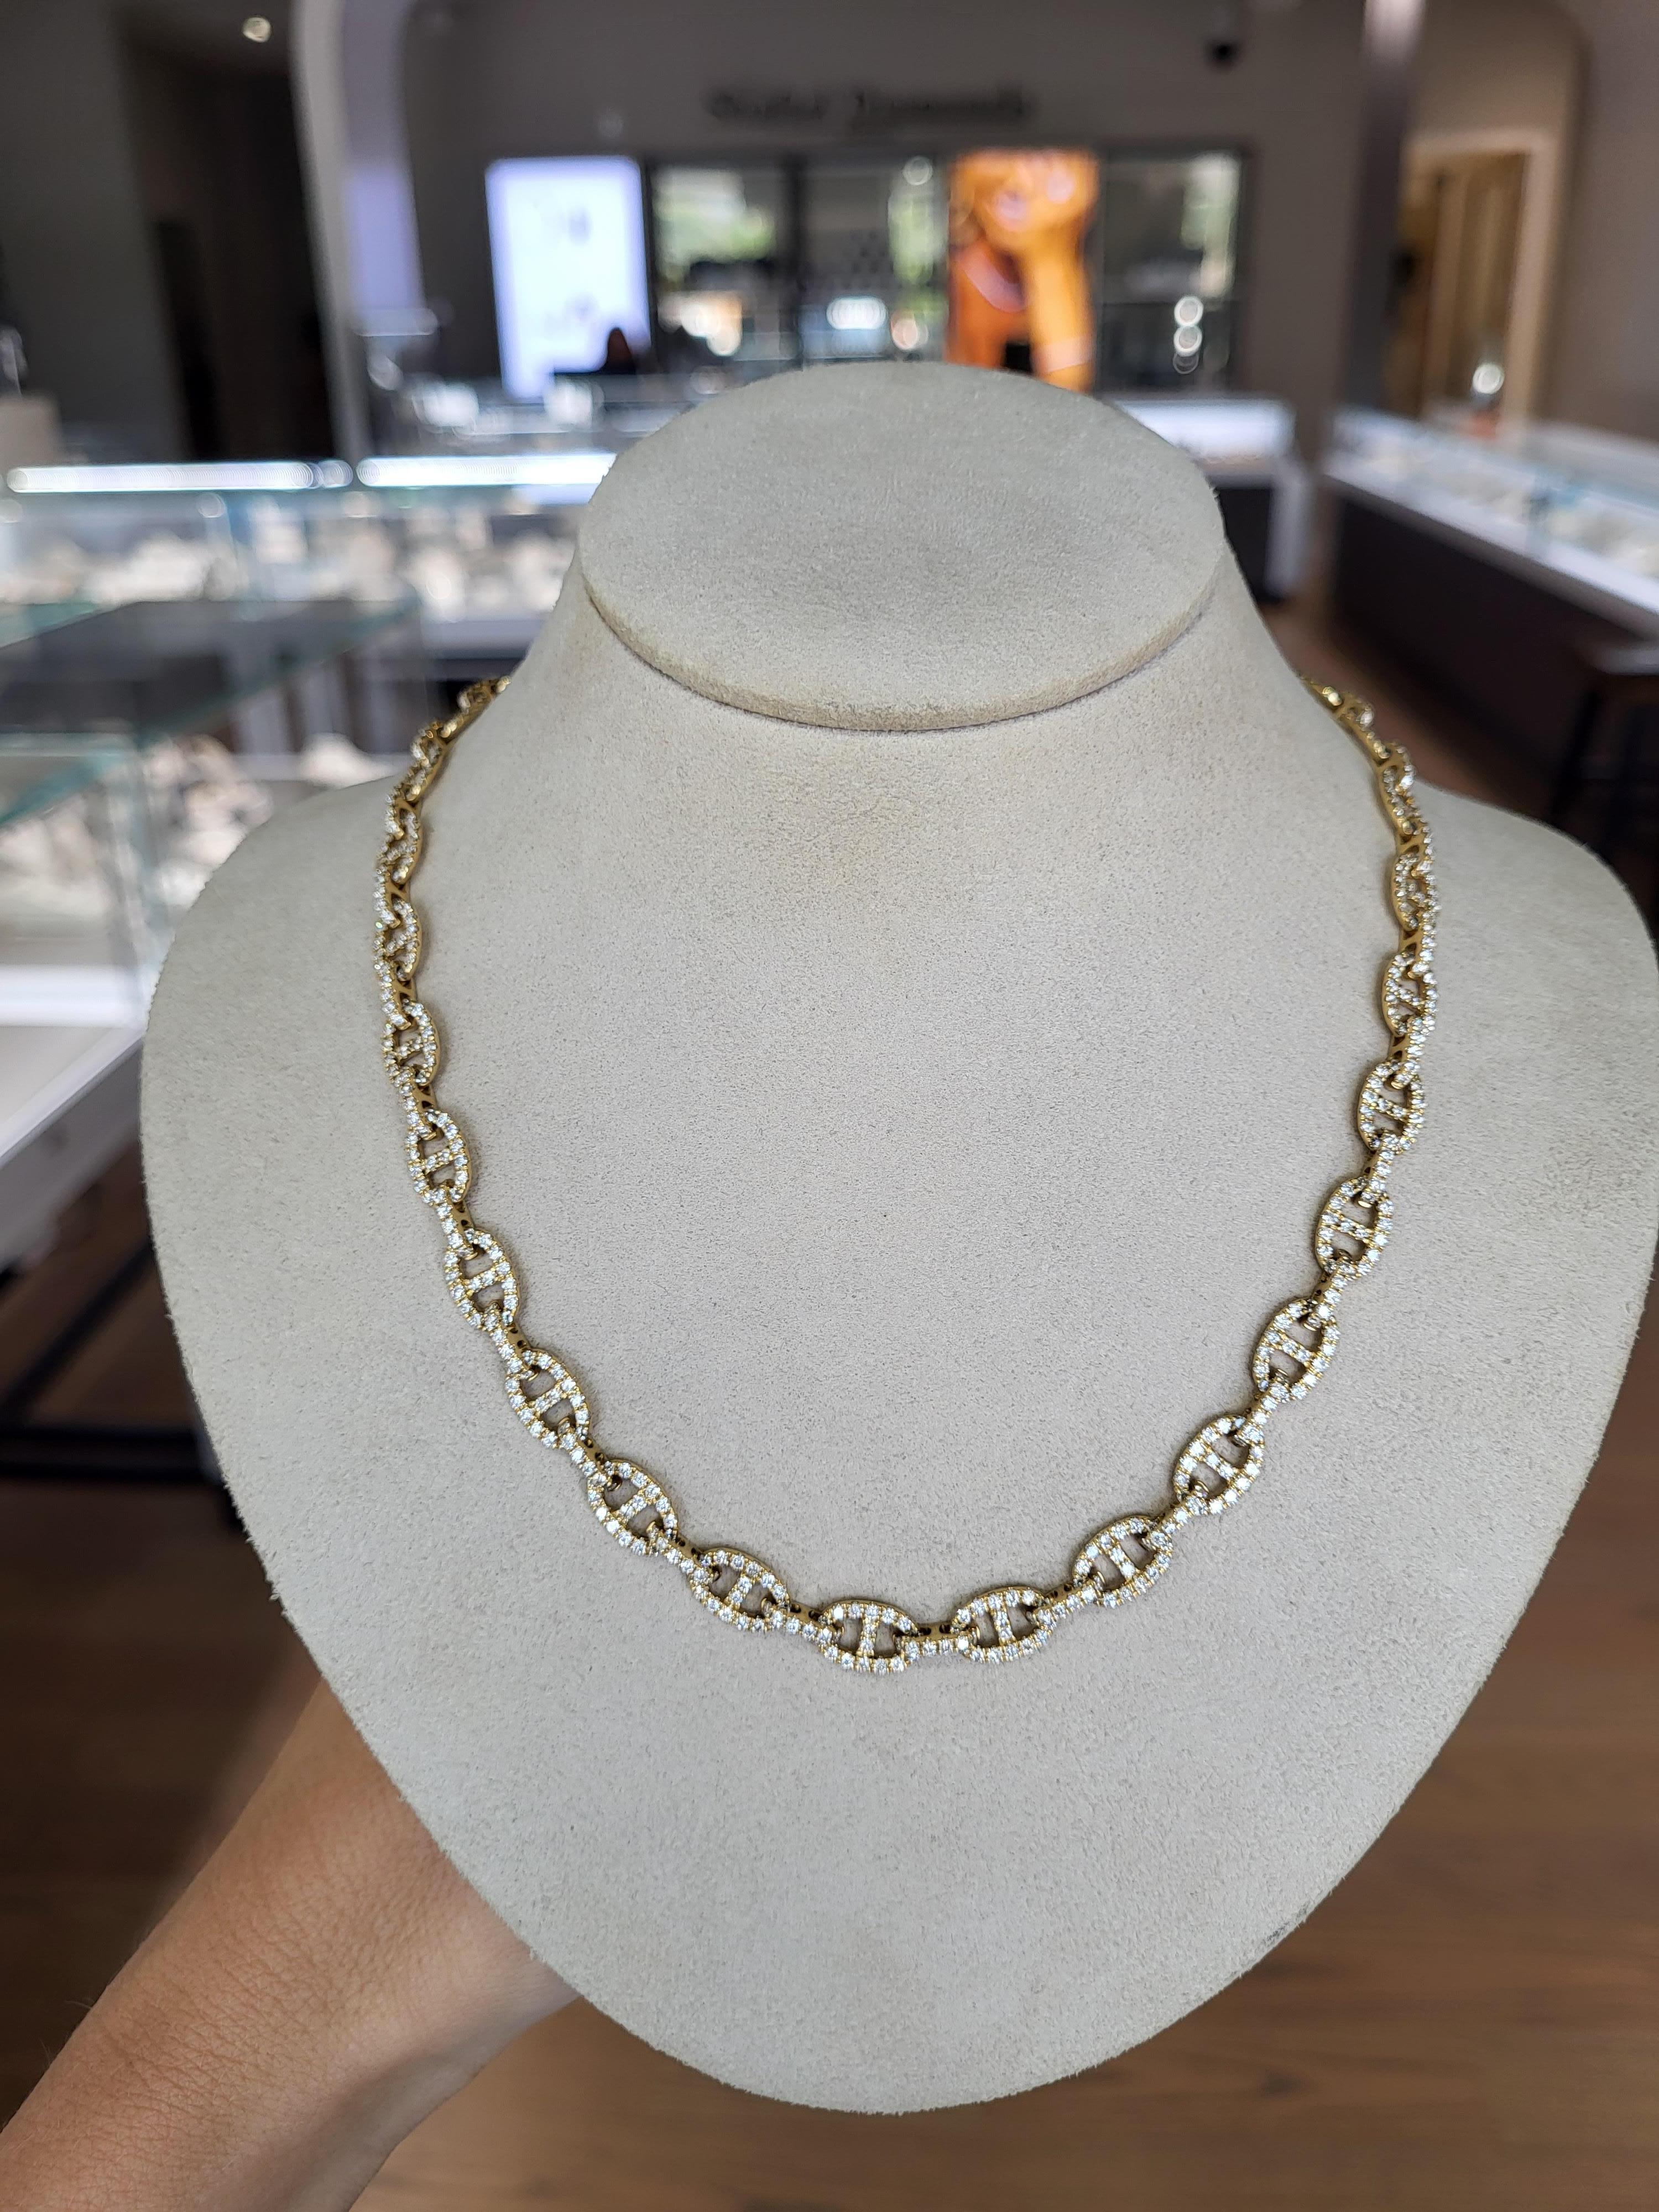 18 Karat Yellow Gold 6.22 Carat Total Weight Round Diamond Link Necklace For Sale 3